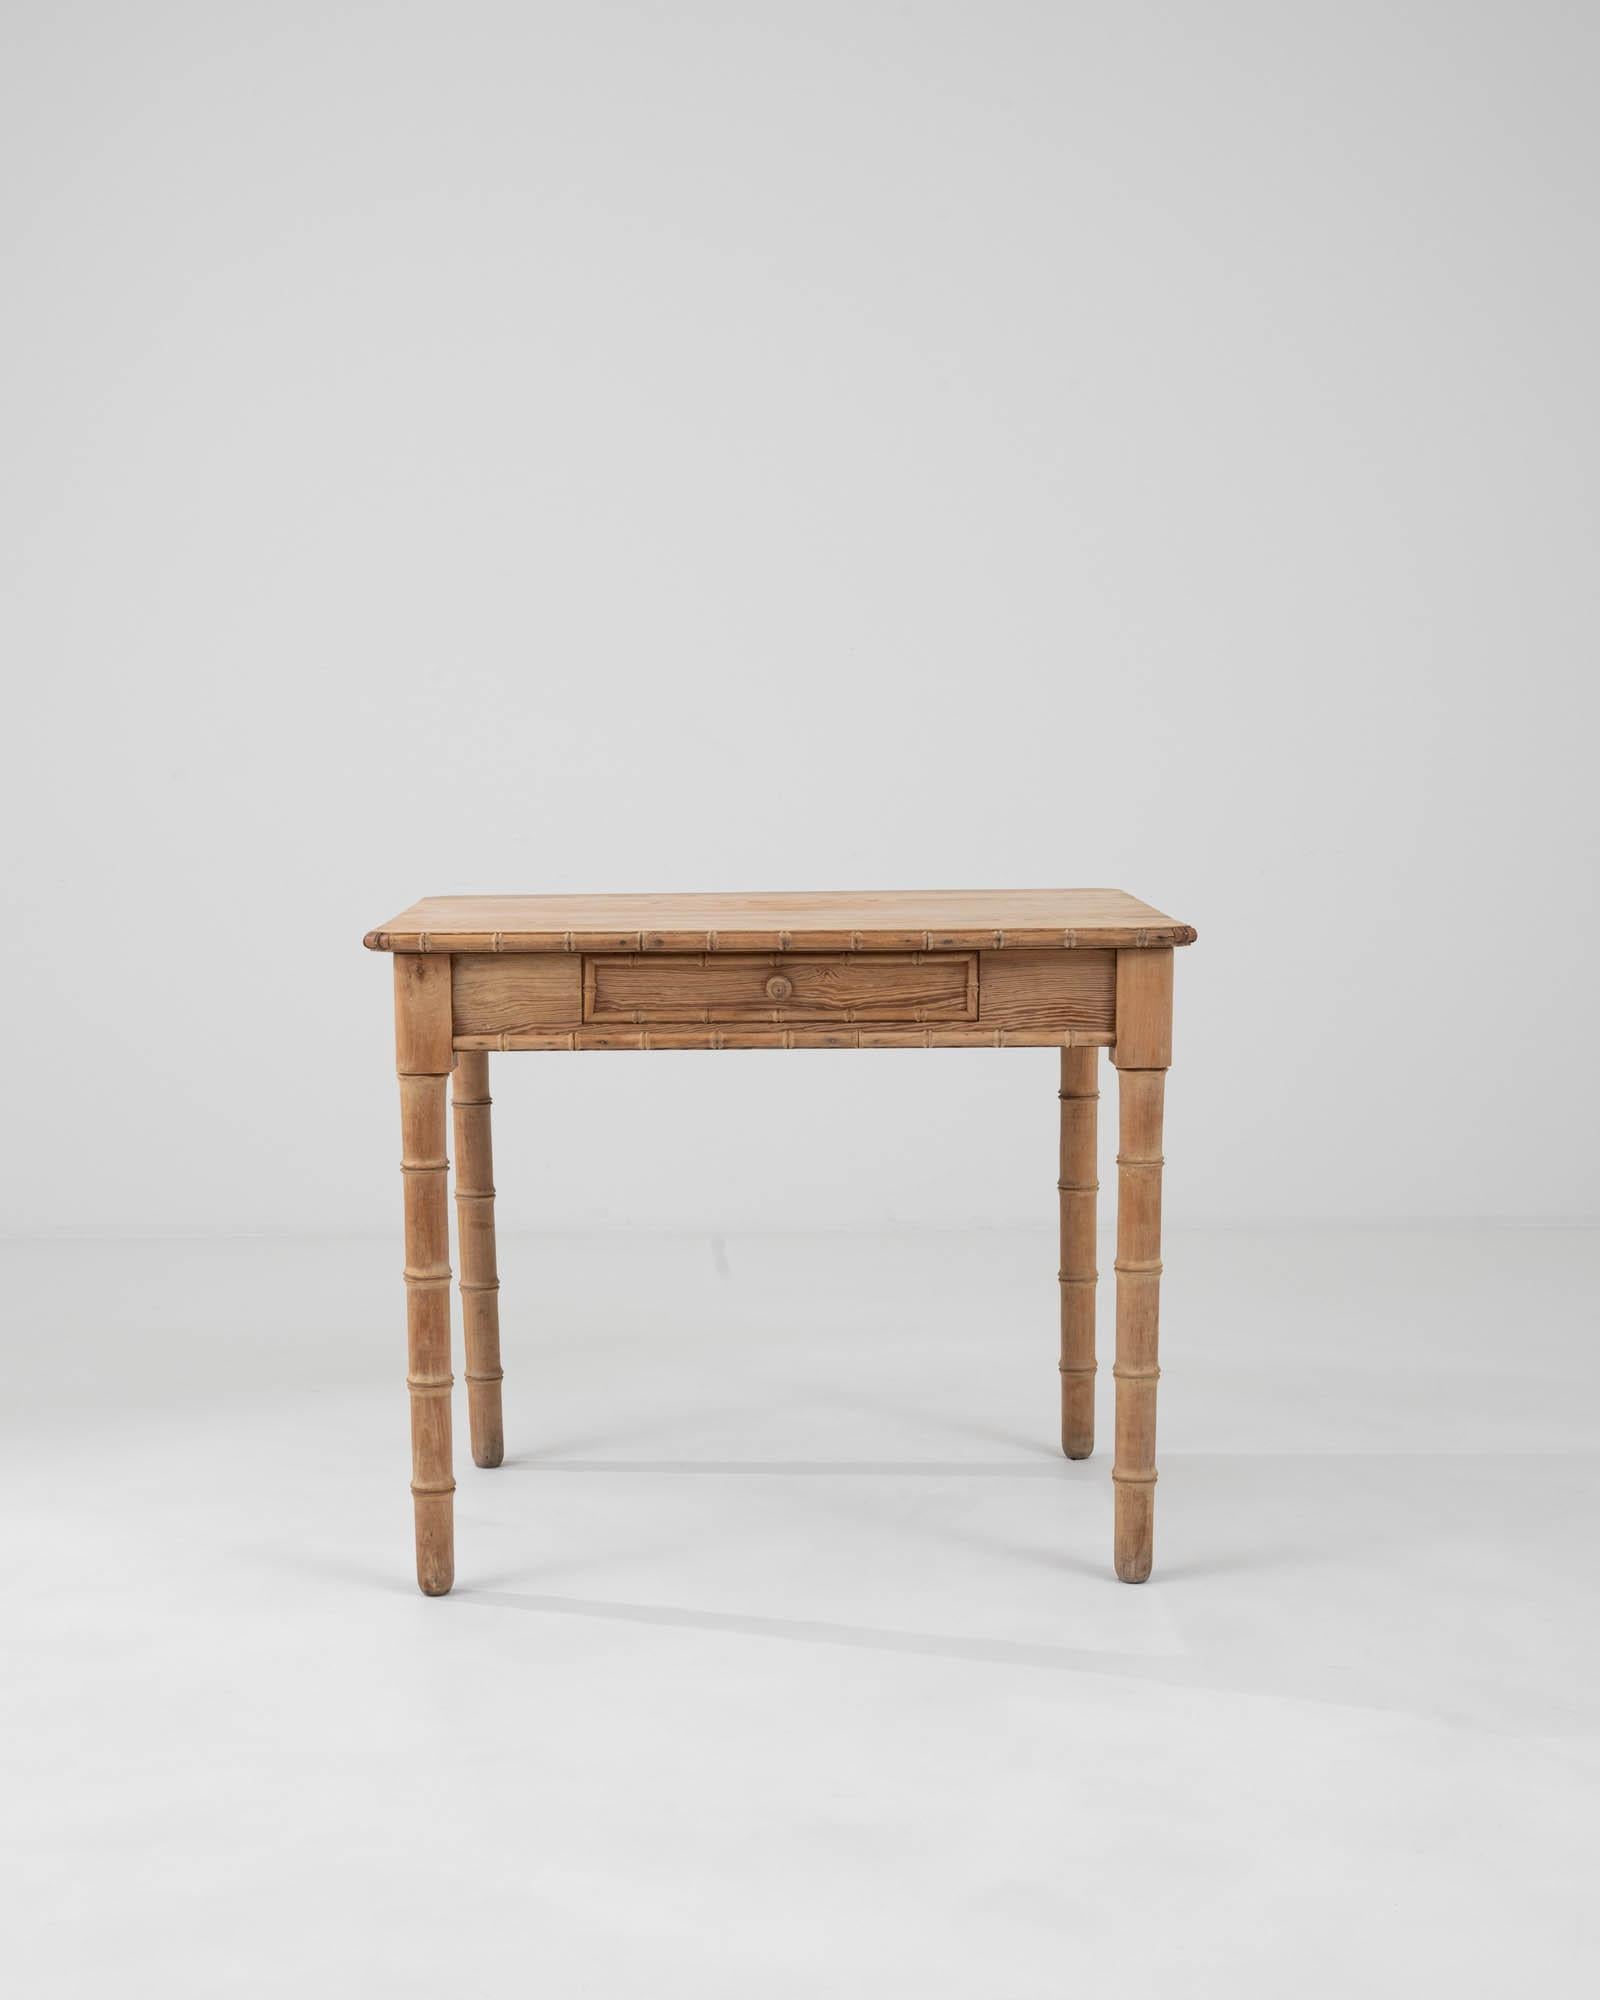 Introducing our exquisite 1900s French Wooden Desk, a timeless piece that exudes classical elegance and craftsmanship. This charming table, crafted from rich, aged wood, brings a piece of French history into your space, featuring distinctive